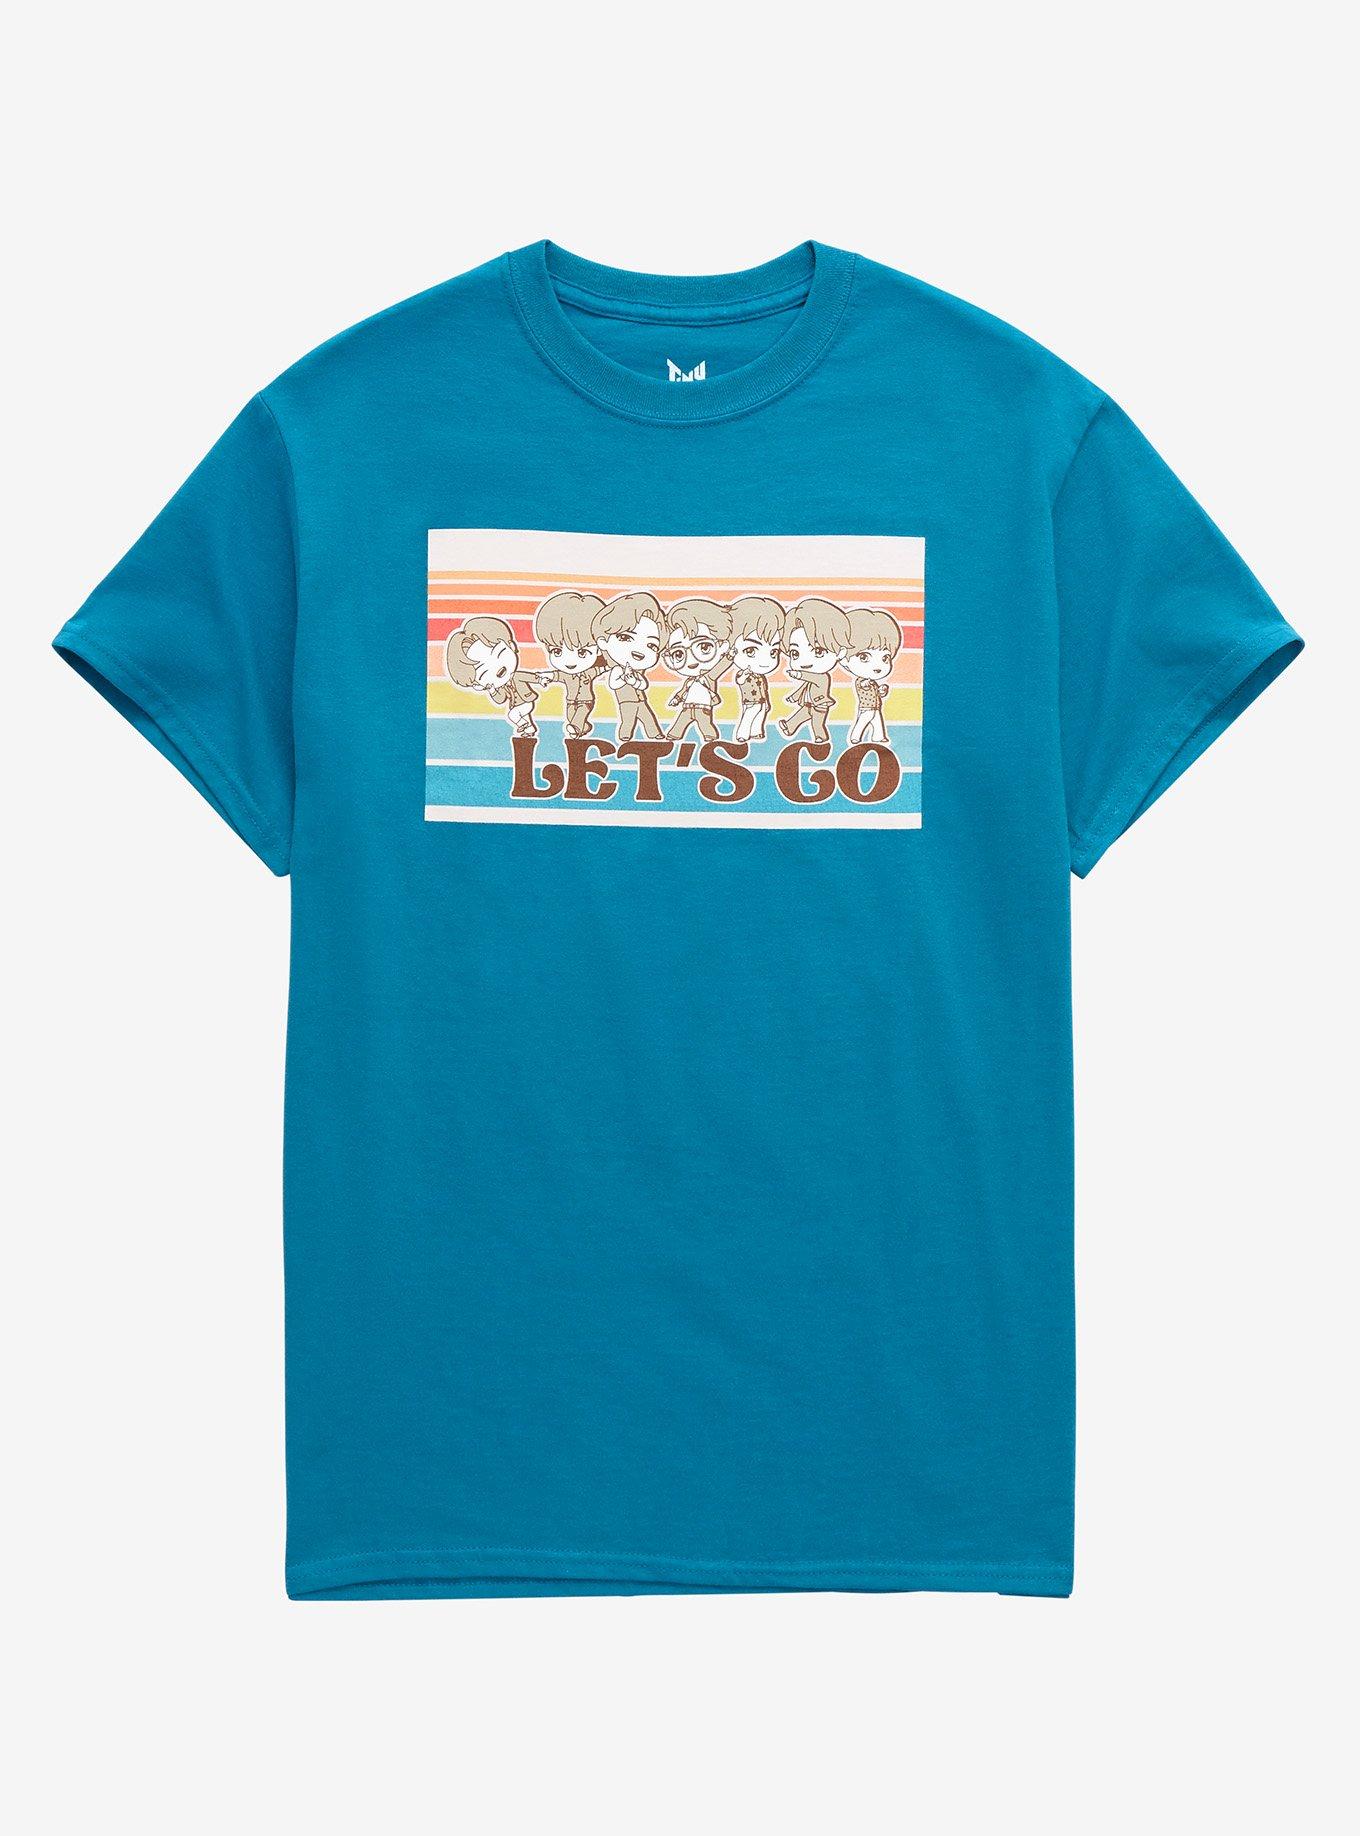 TinyTAN Dynamite Teal Group T-Shirt Inspired By BTS, TEAL, hi-res